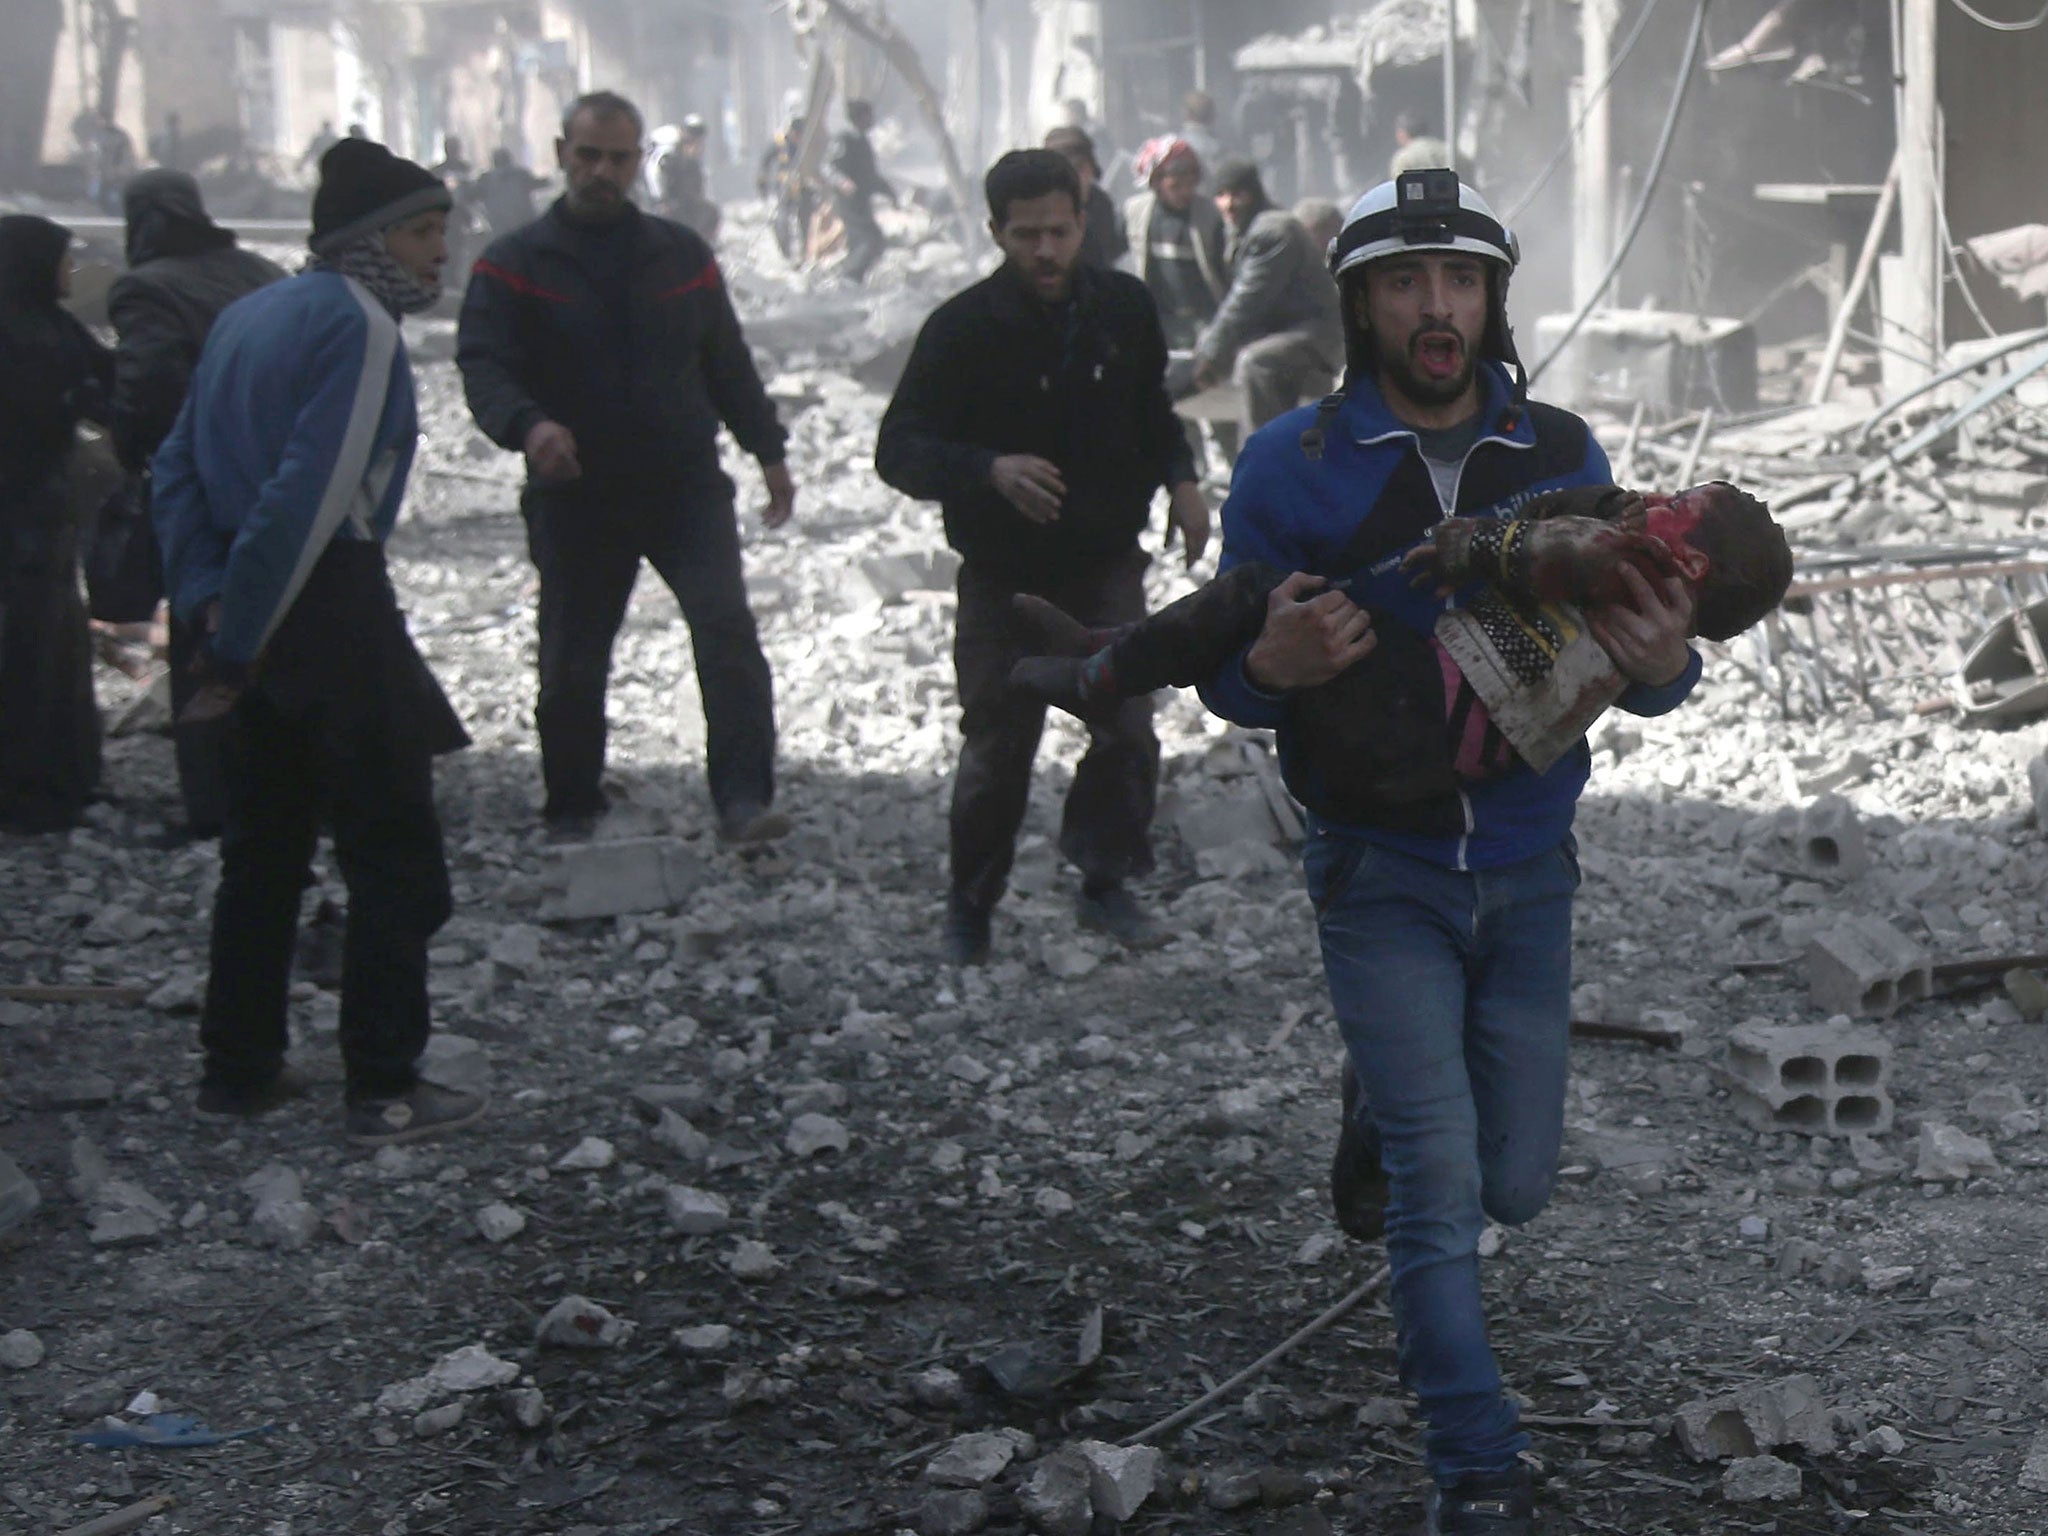 A Syrian civil defence member carries an injured child rescued from between the rubble of buildings following government bombing in the rebel-held town of Hamouria, in the besieged Eastern Ghouta region on the outskirts of the capital Damascus